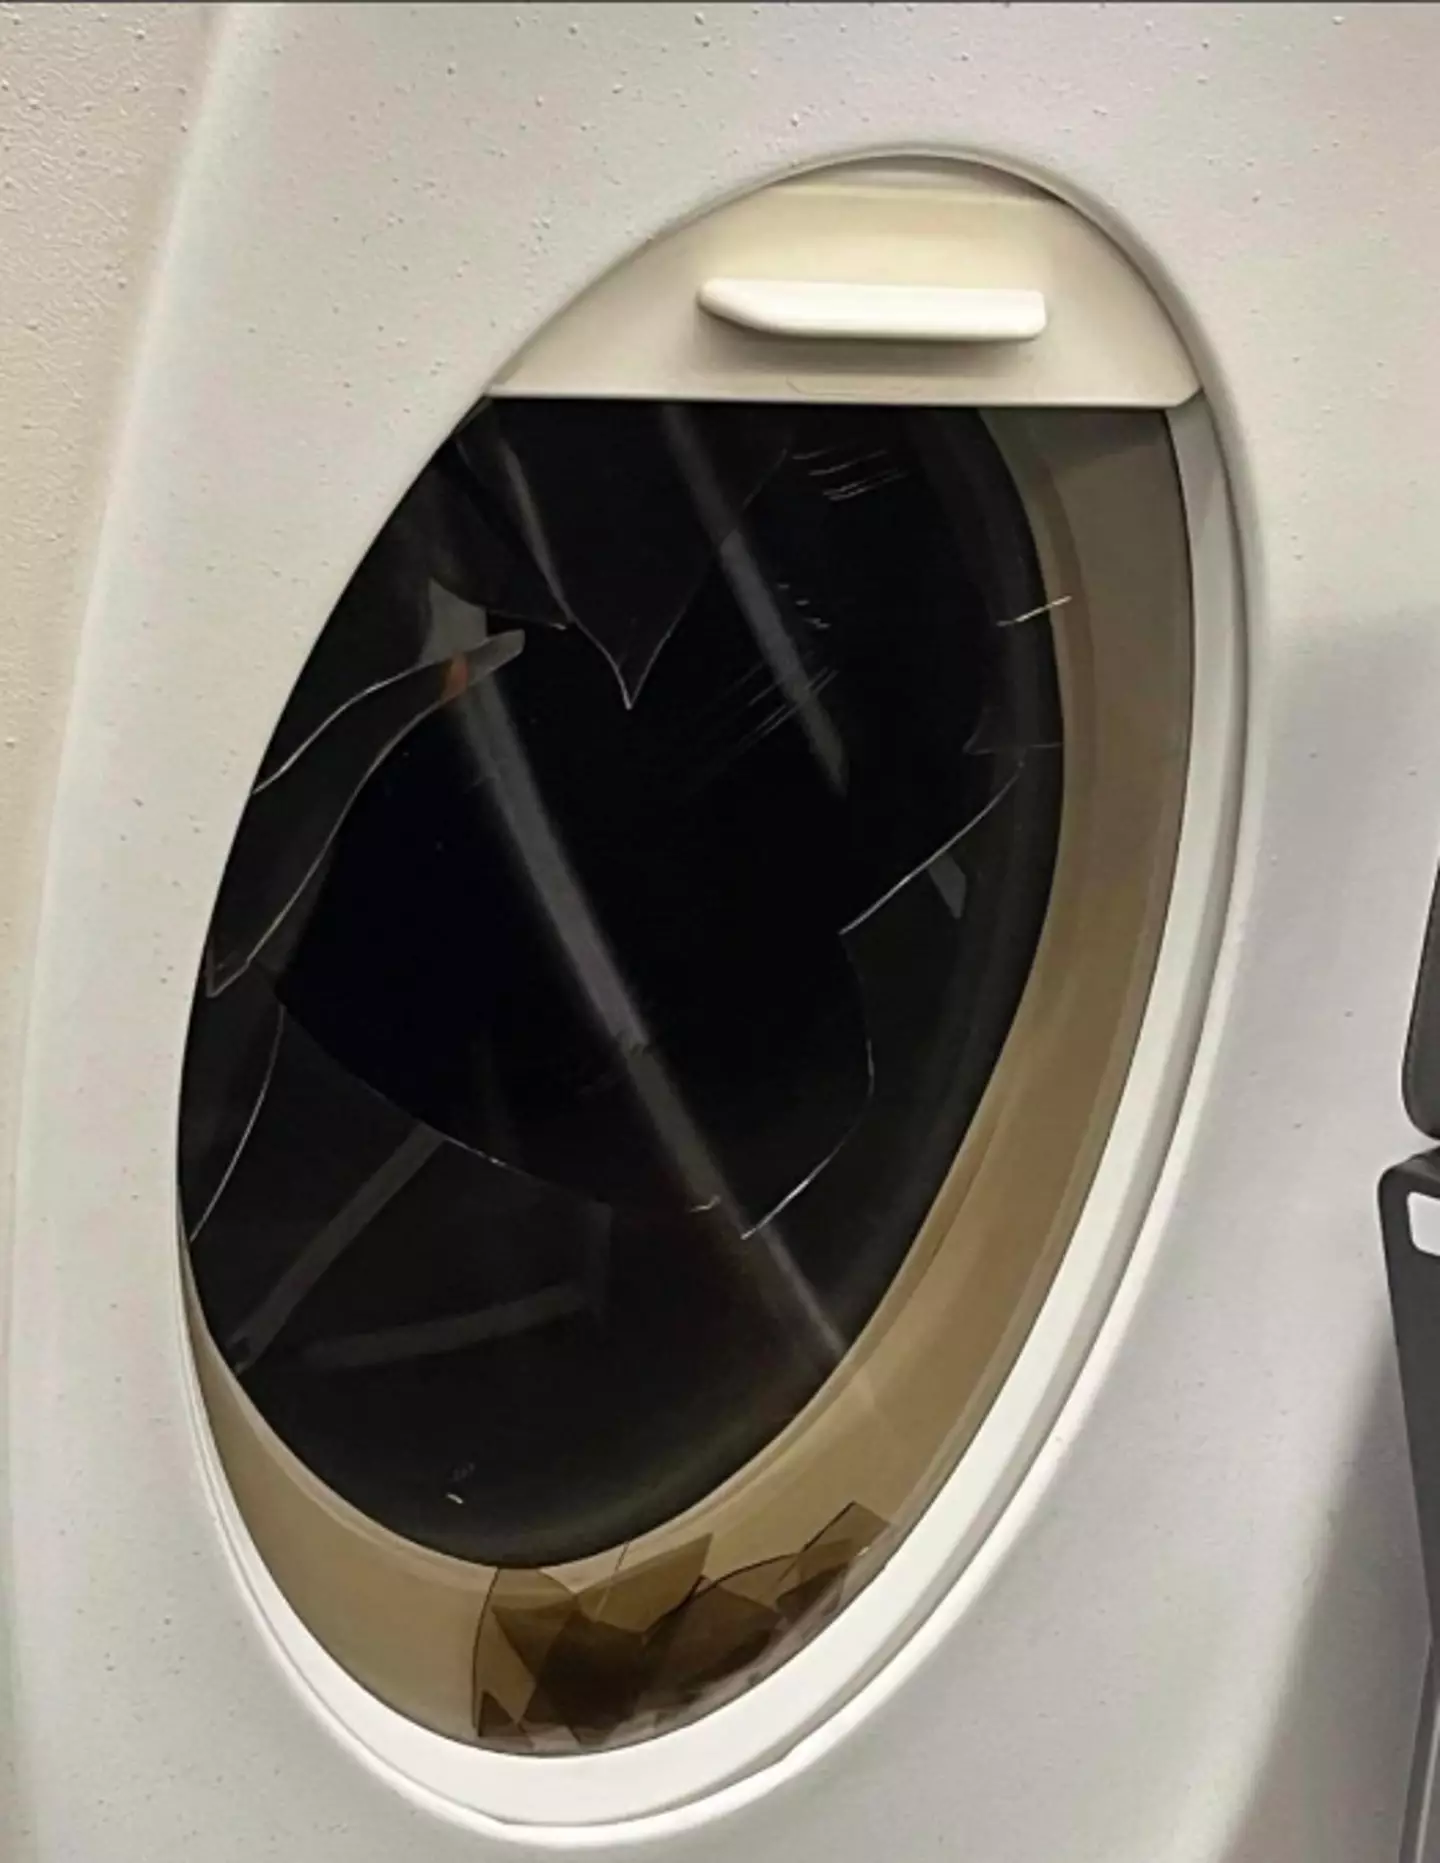 The window that was allegedly broken on the flight.